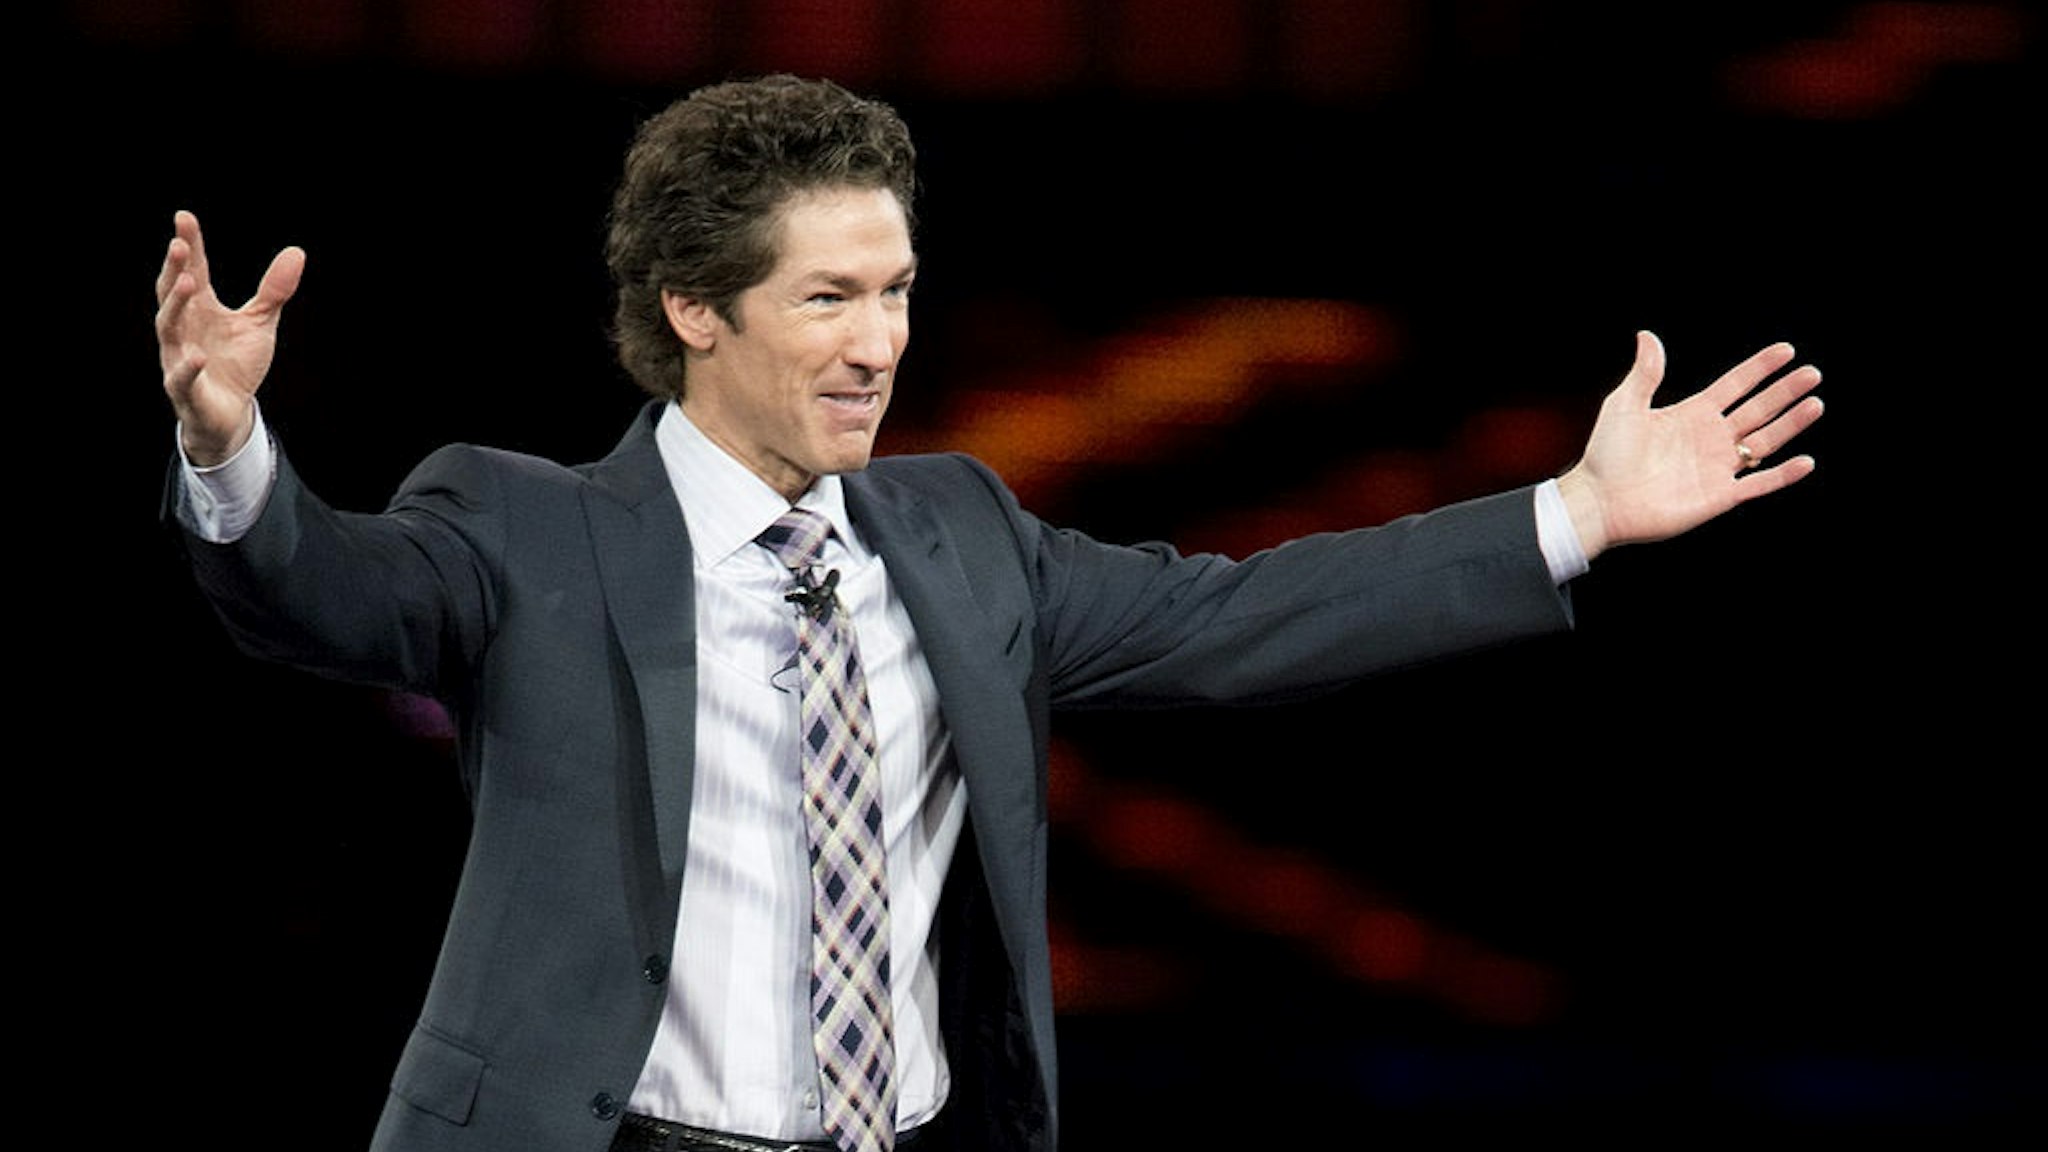 DALLAS, TX - AUGUST 30: Pastor Joel Osteen speaks during MegaFest at the American Airlines Center on August 30, 2013 in Dallas, Texas.